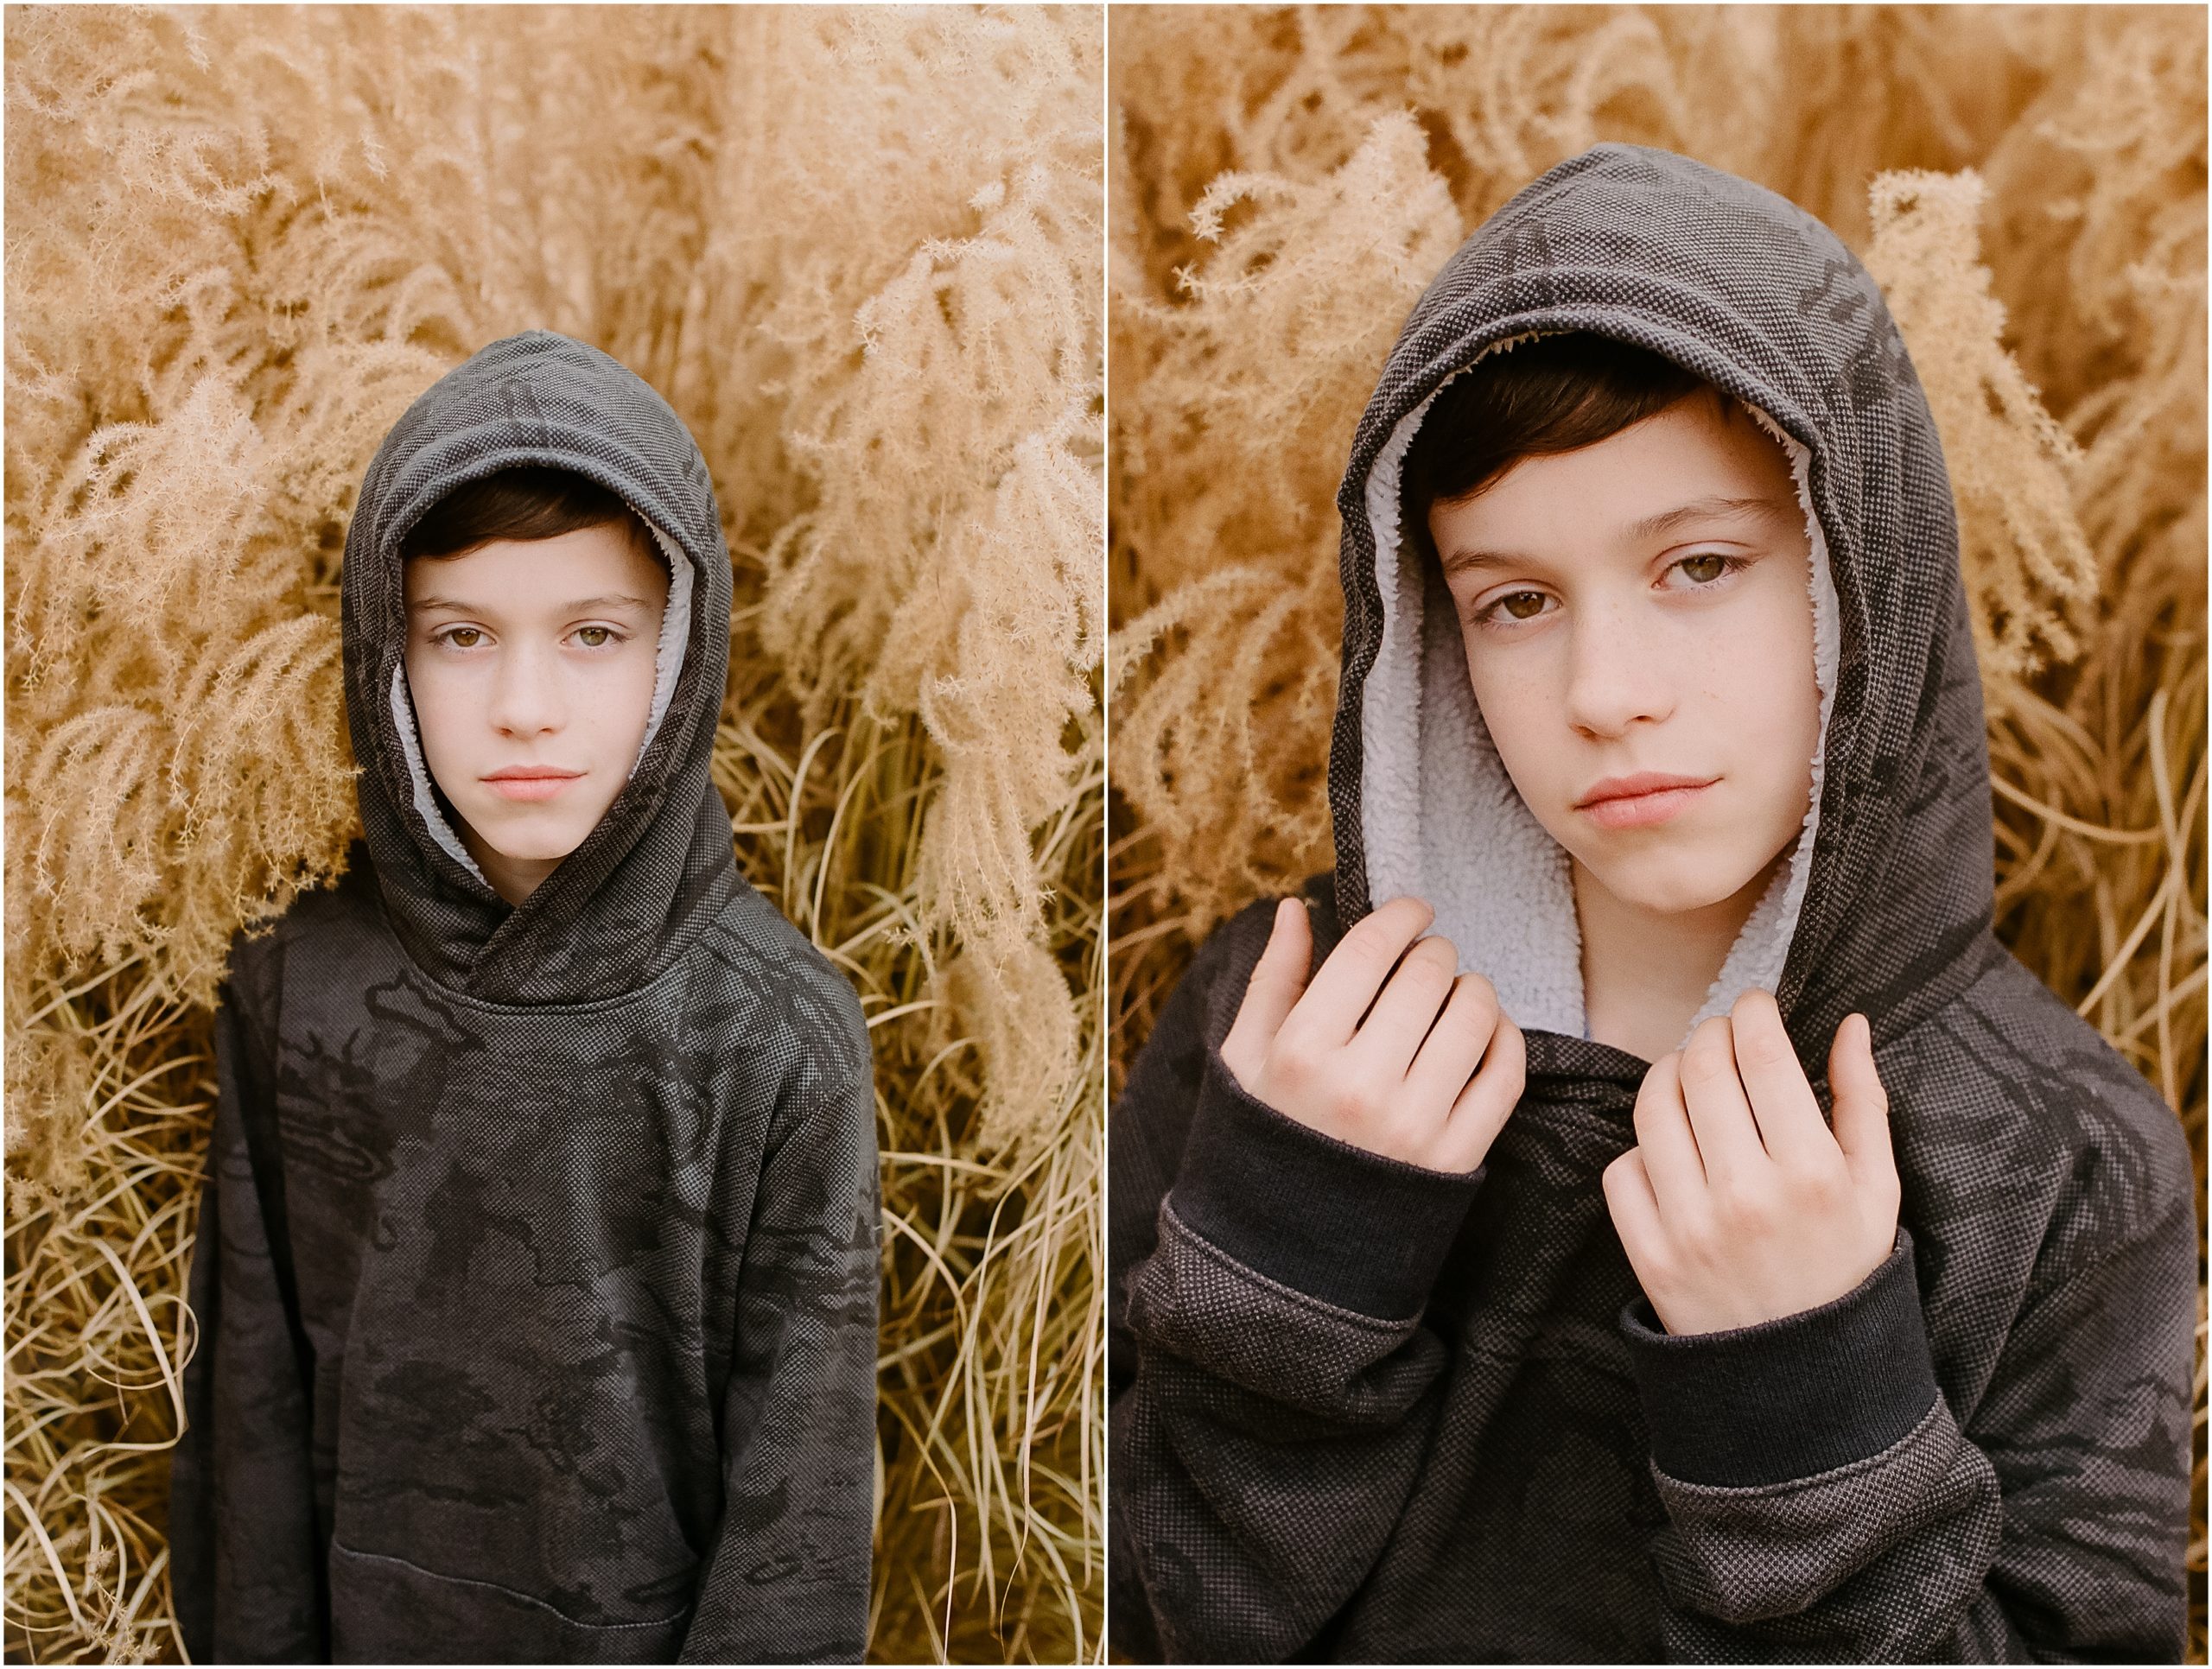 A collage photograph of a young boy dressed in an Under Armour hoodie standing in tall grass and looking at the camera.